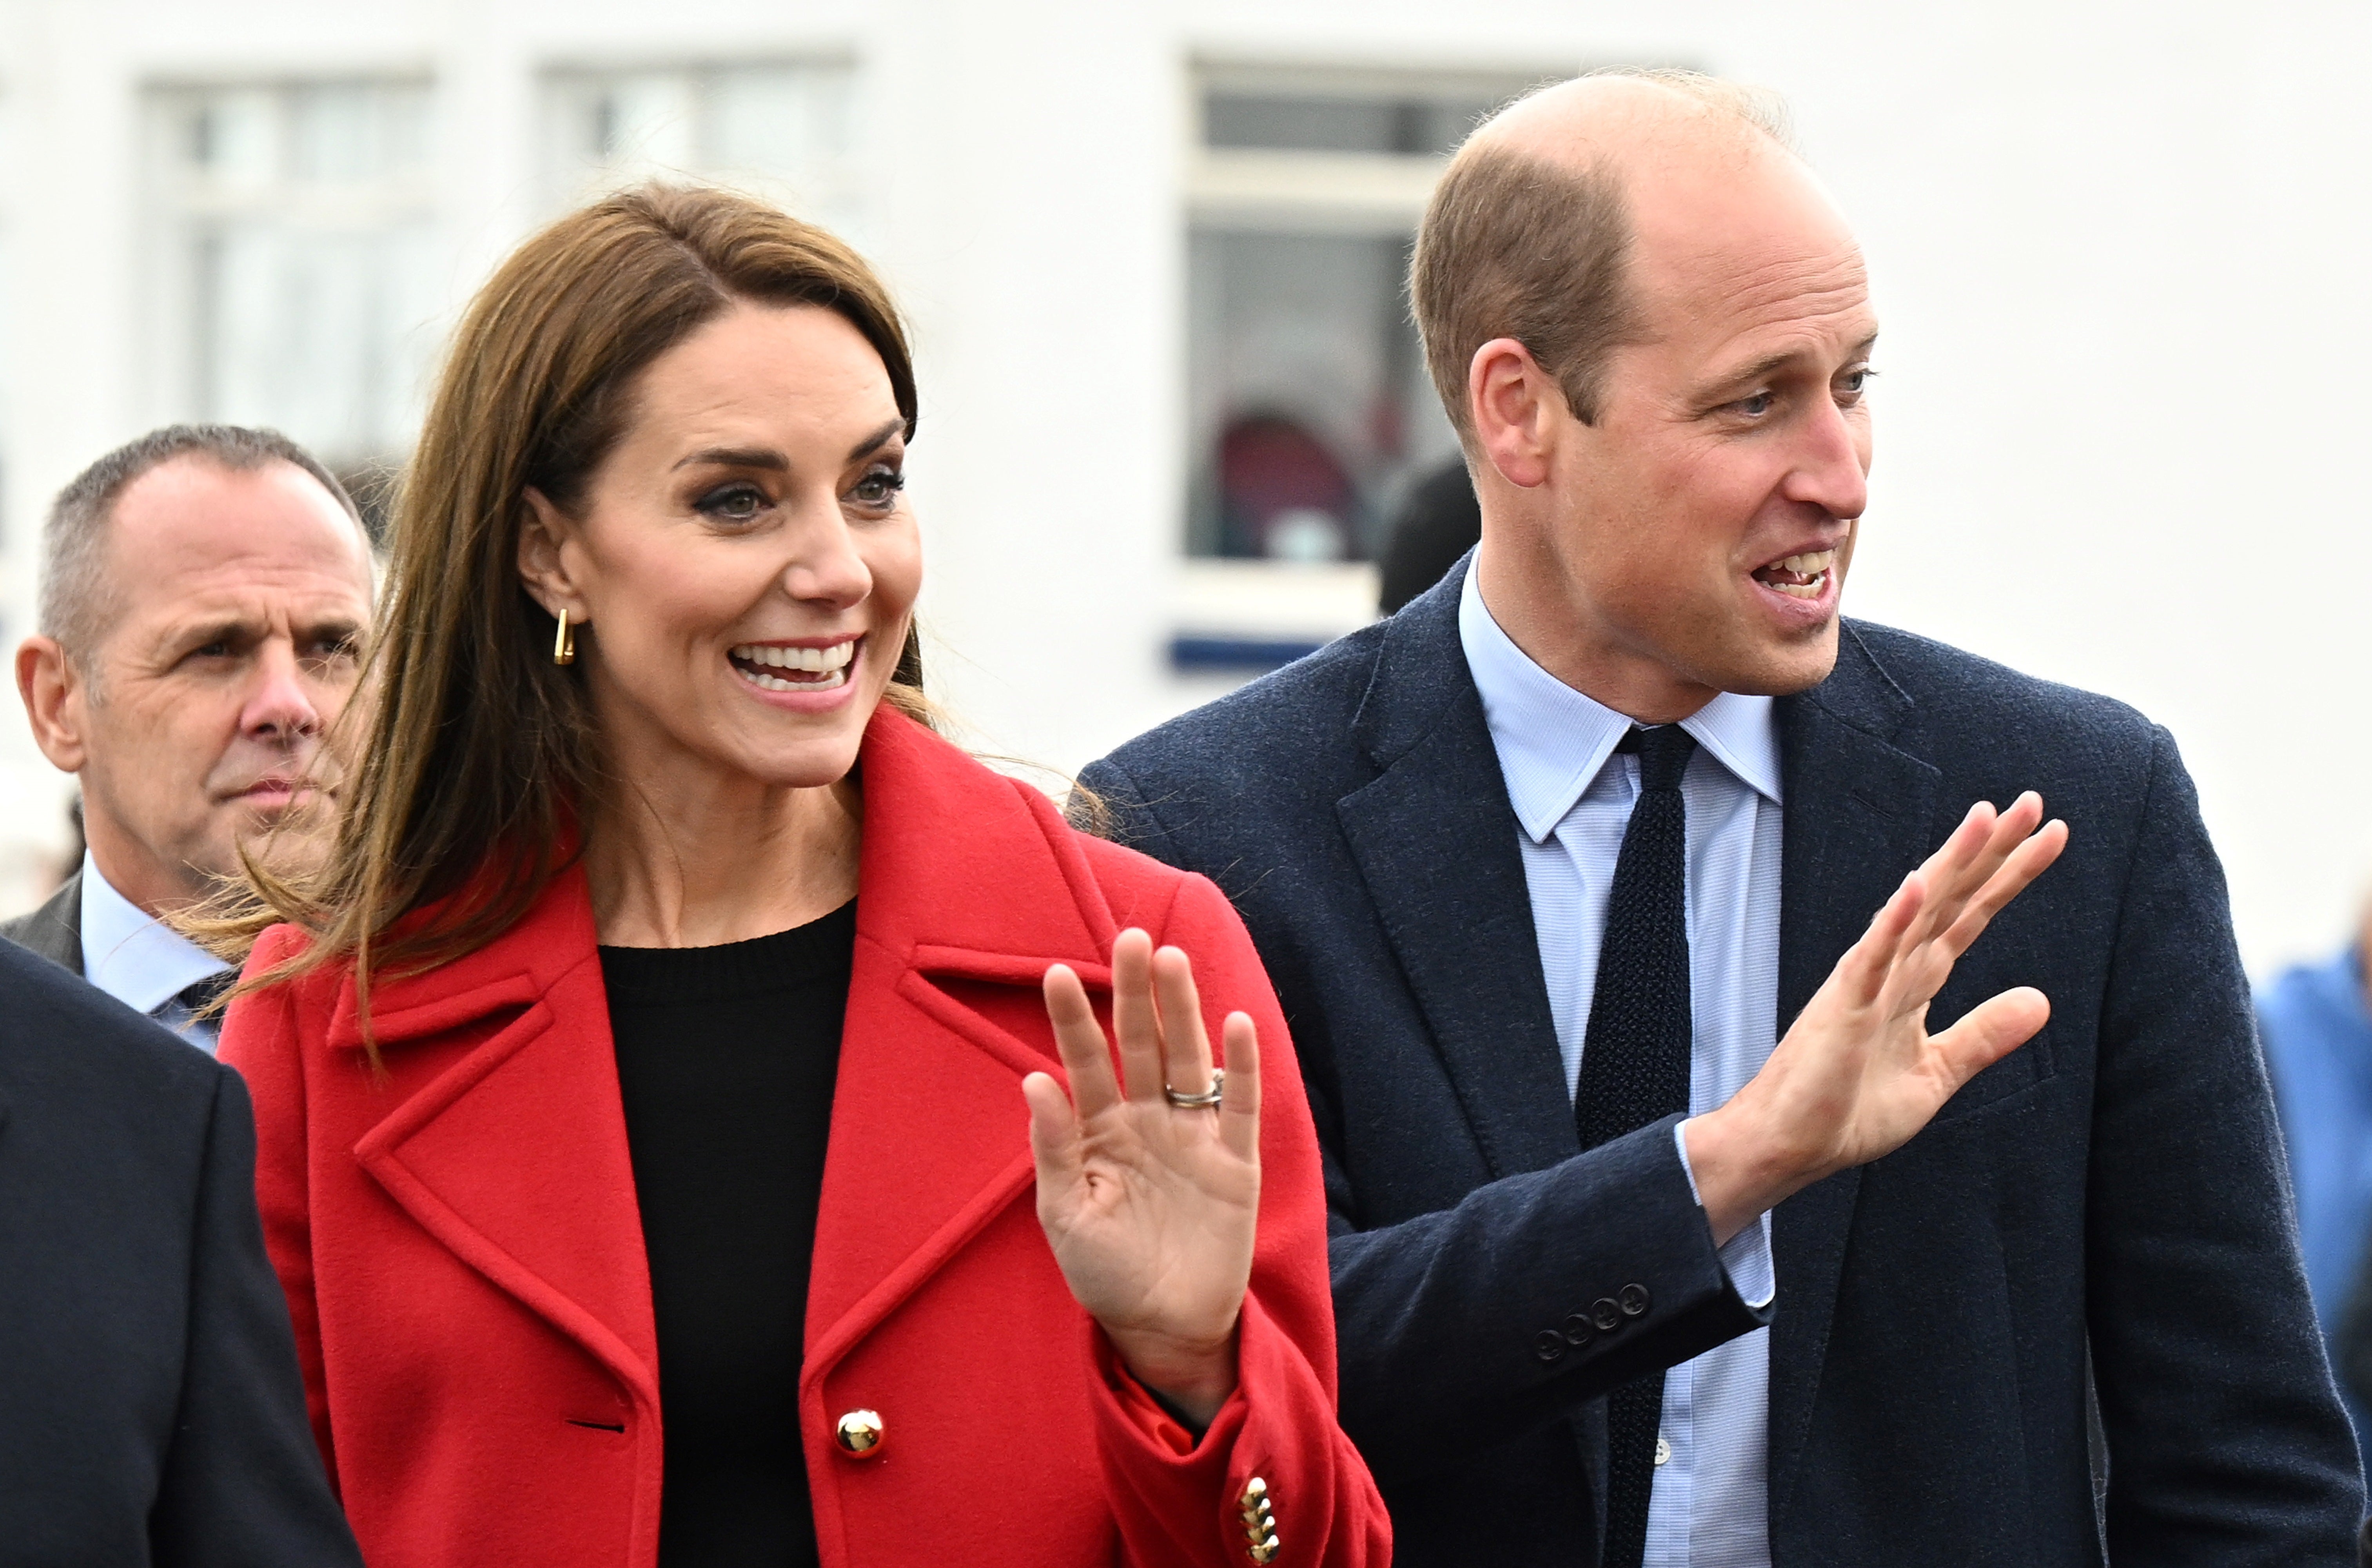 Kate and William are working royals